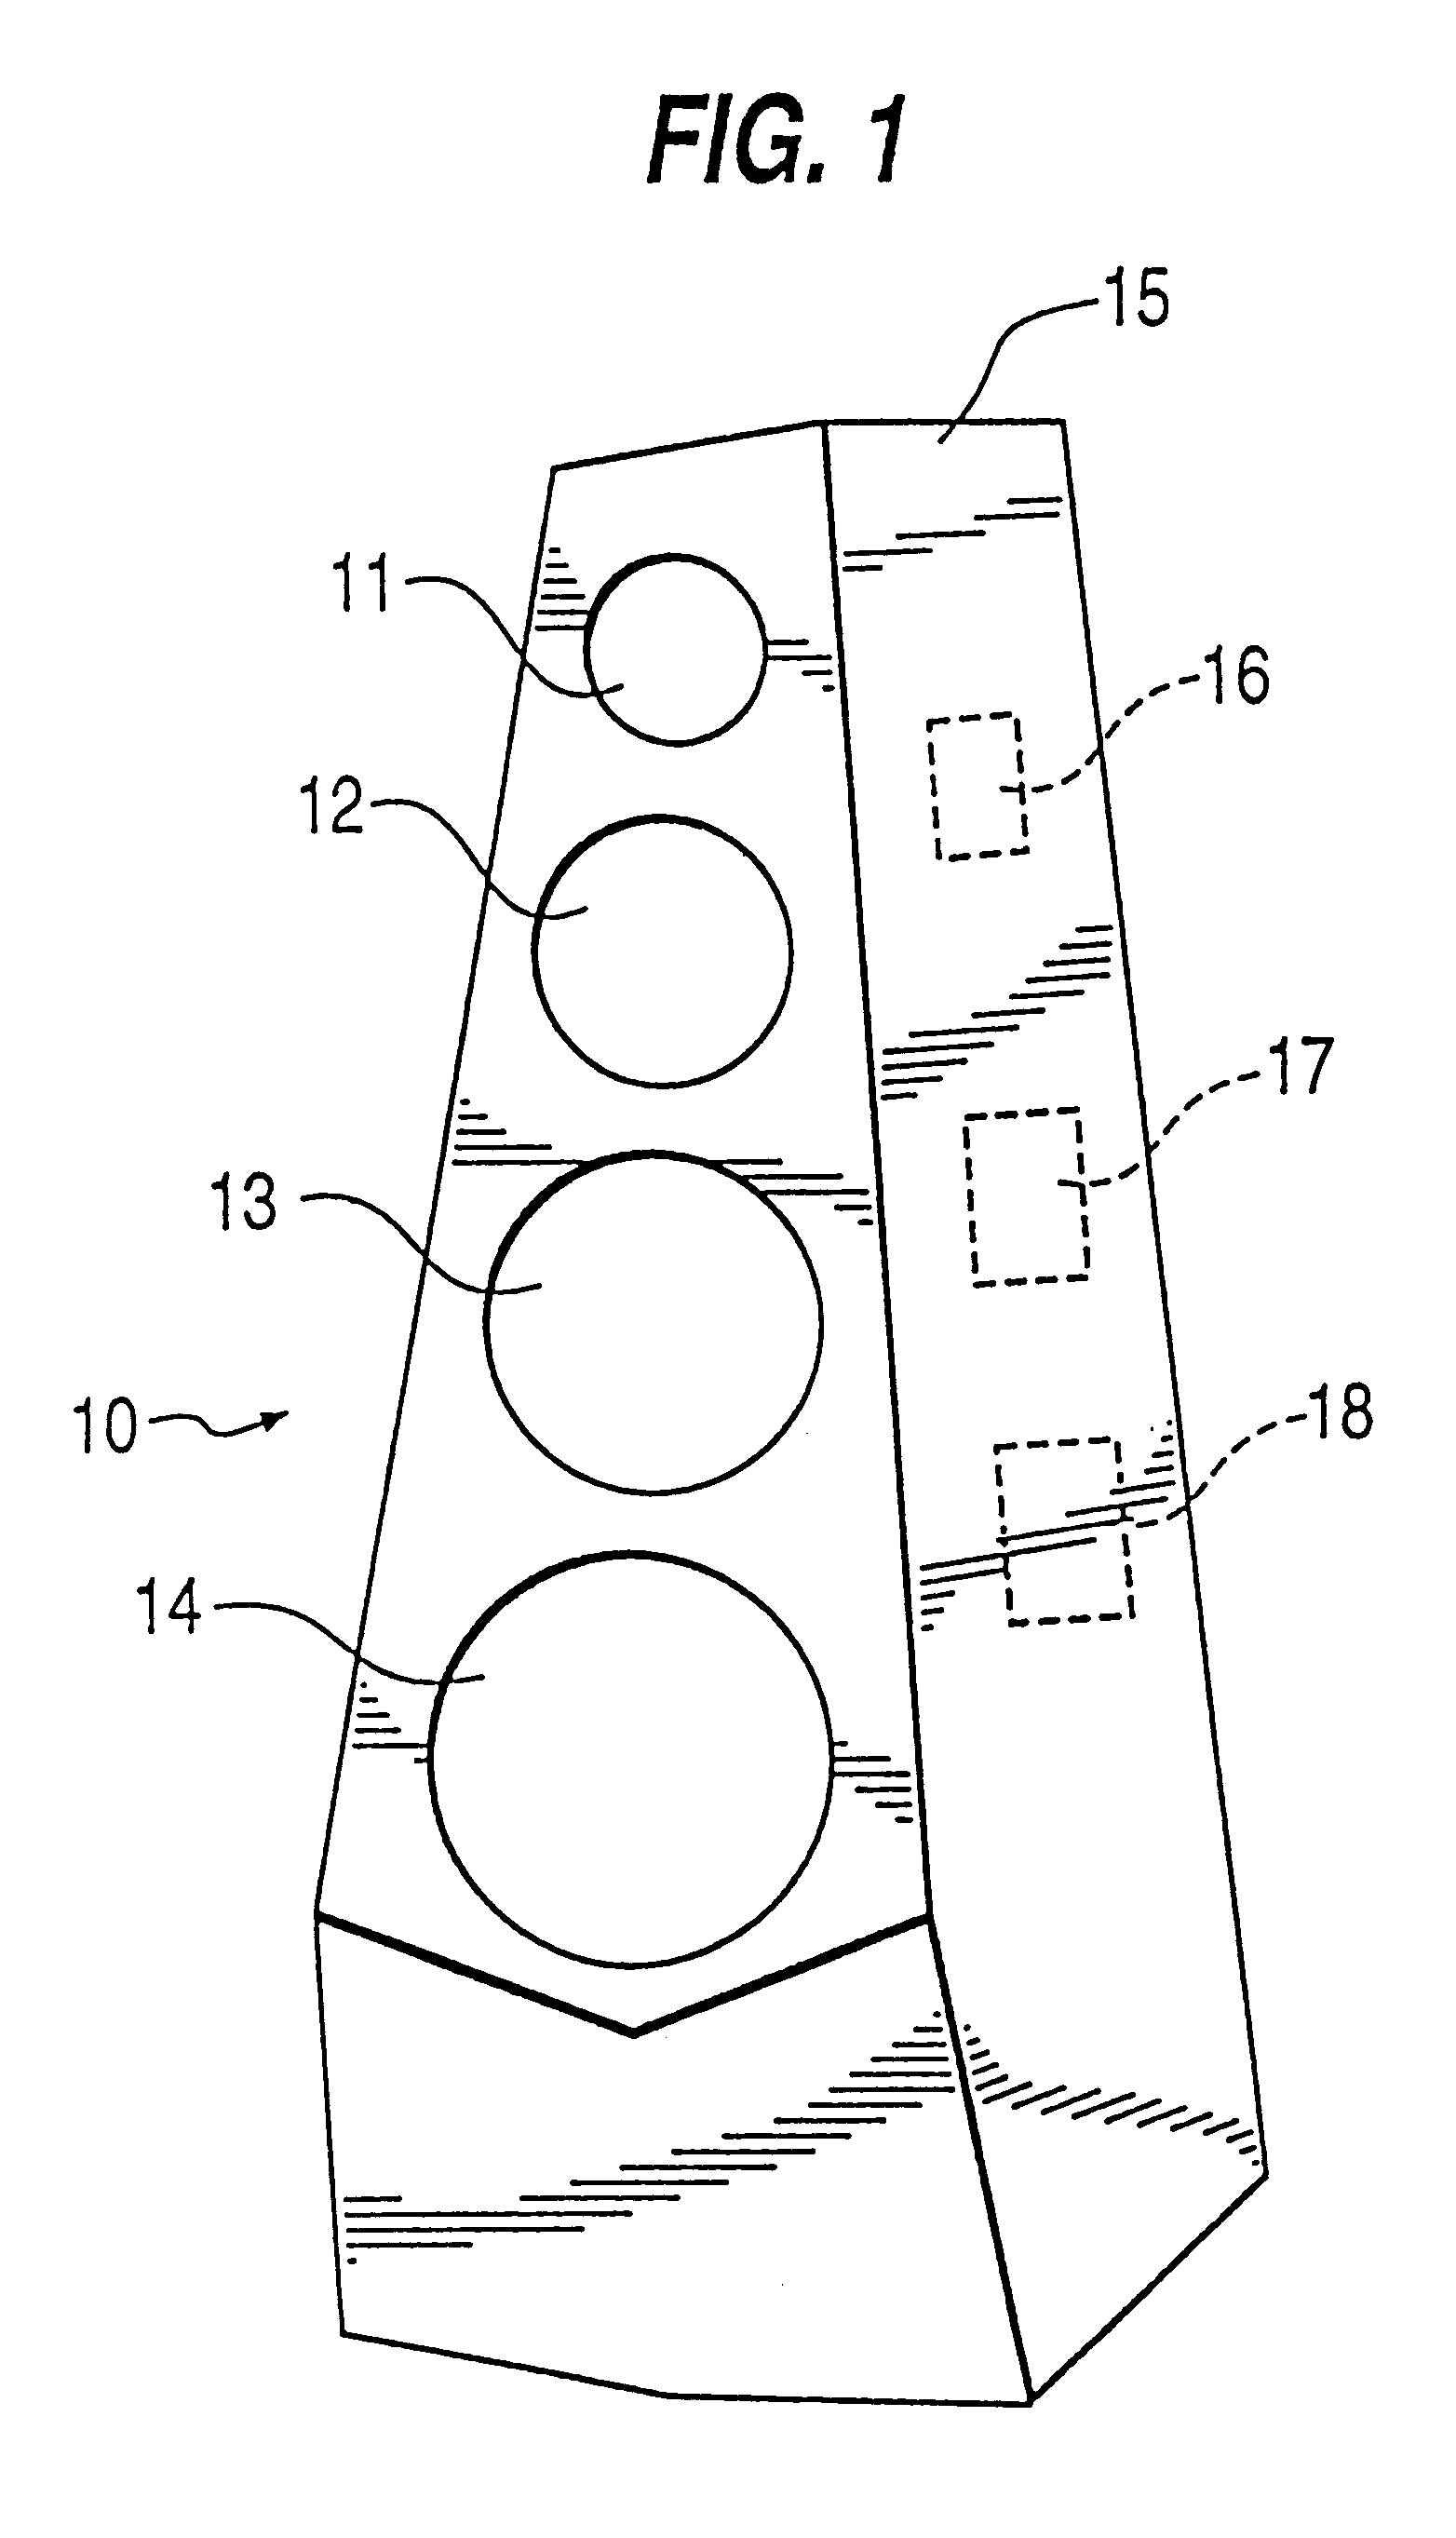 Isolation/damping mounting system for loudspeaker crossover network